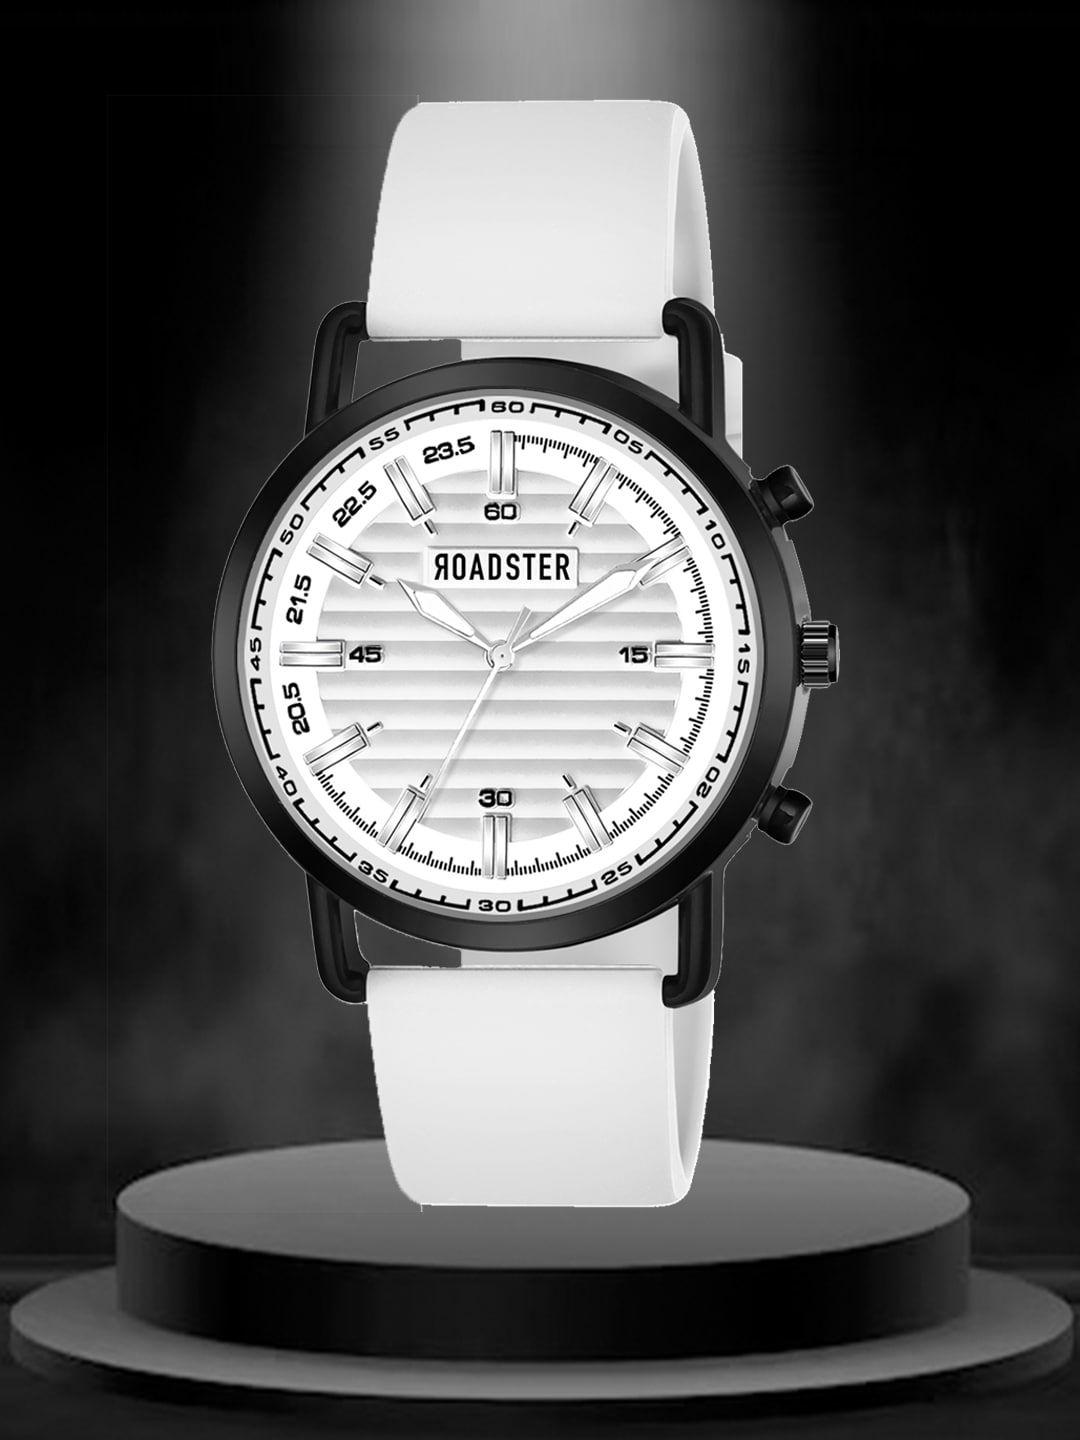 the roadster lifestyle co. men analogue water resistant watch hobrd-137